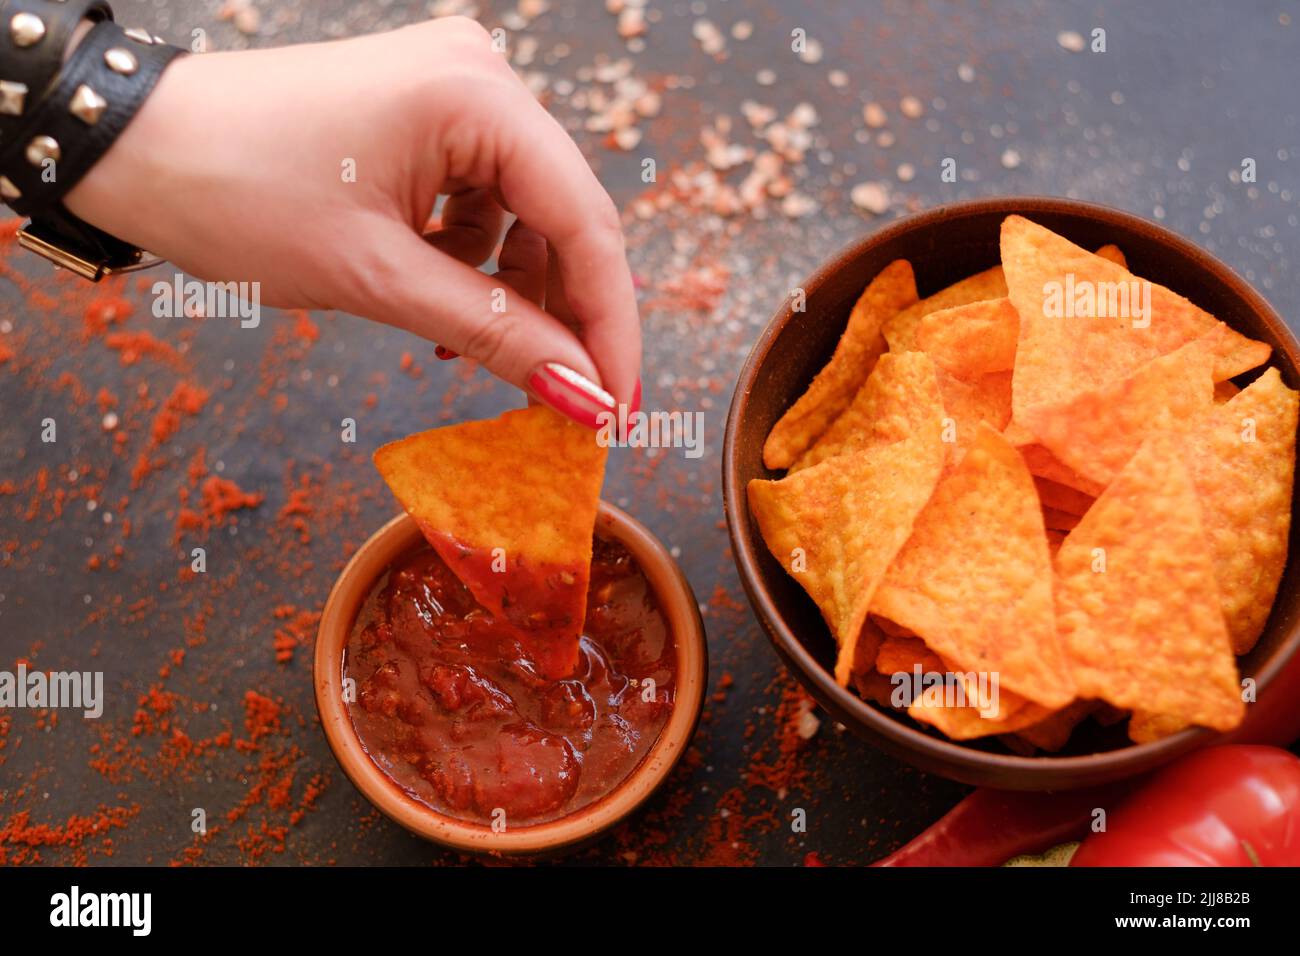 nacho chips party munchies food snack sauce dip Stock Photo